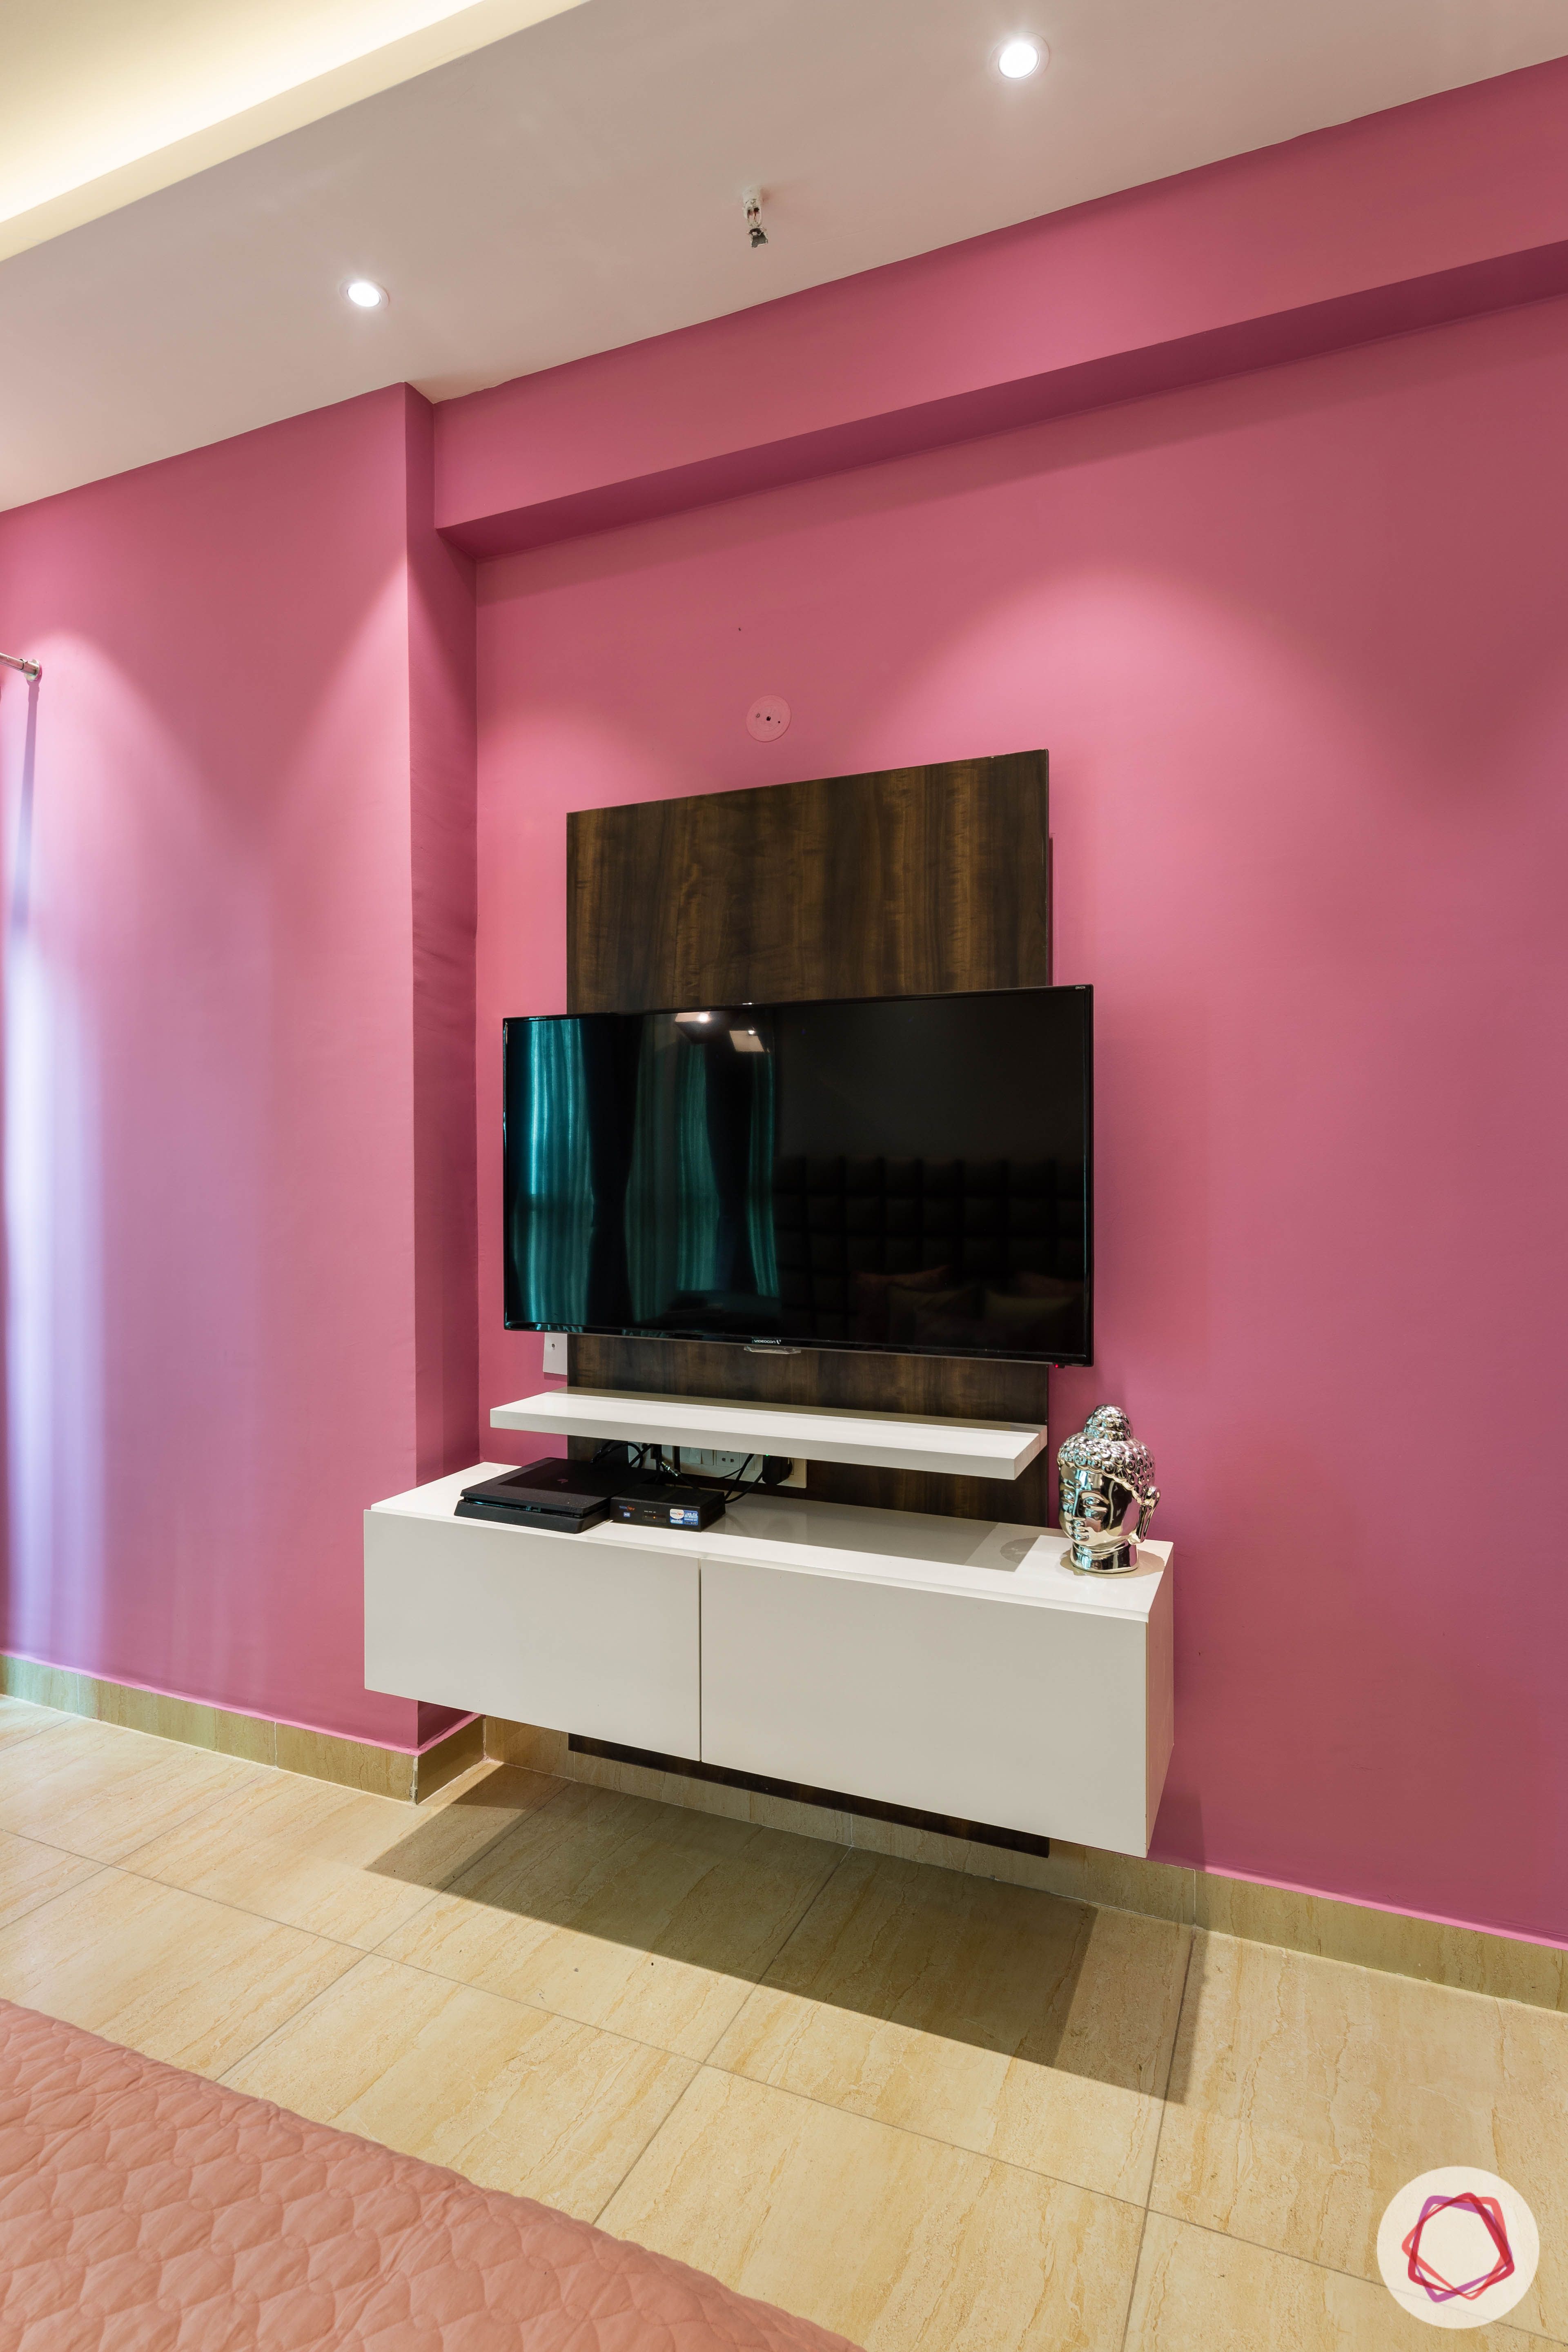 3 bhk flat-bedroom-tv unit-pink wall-wall paint